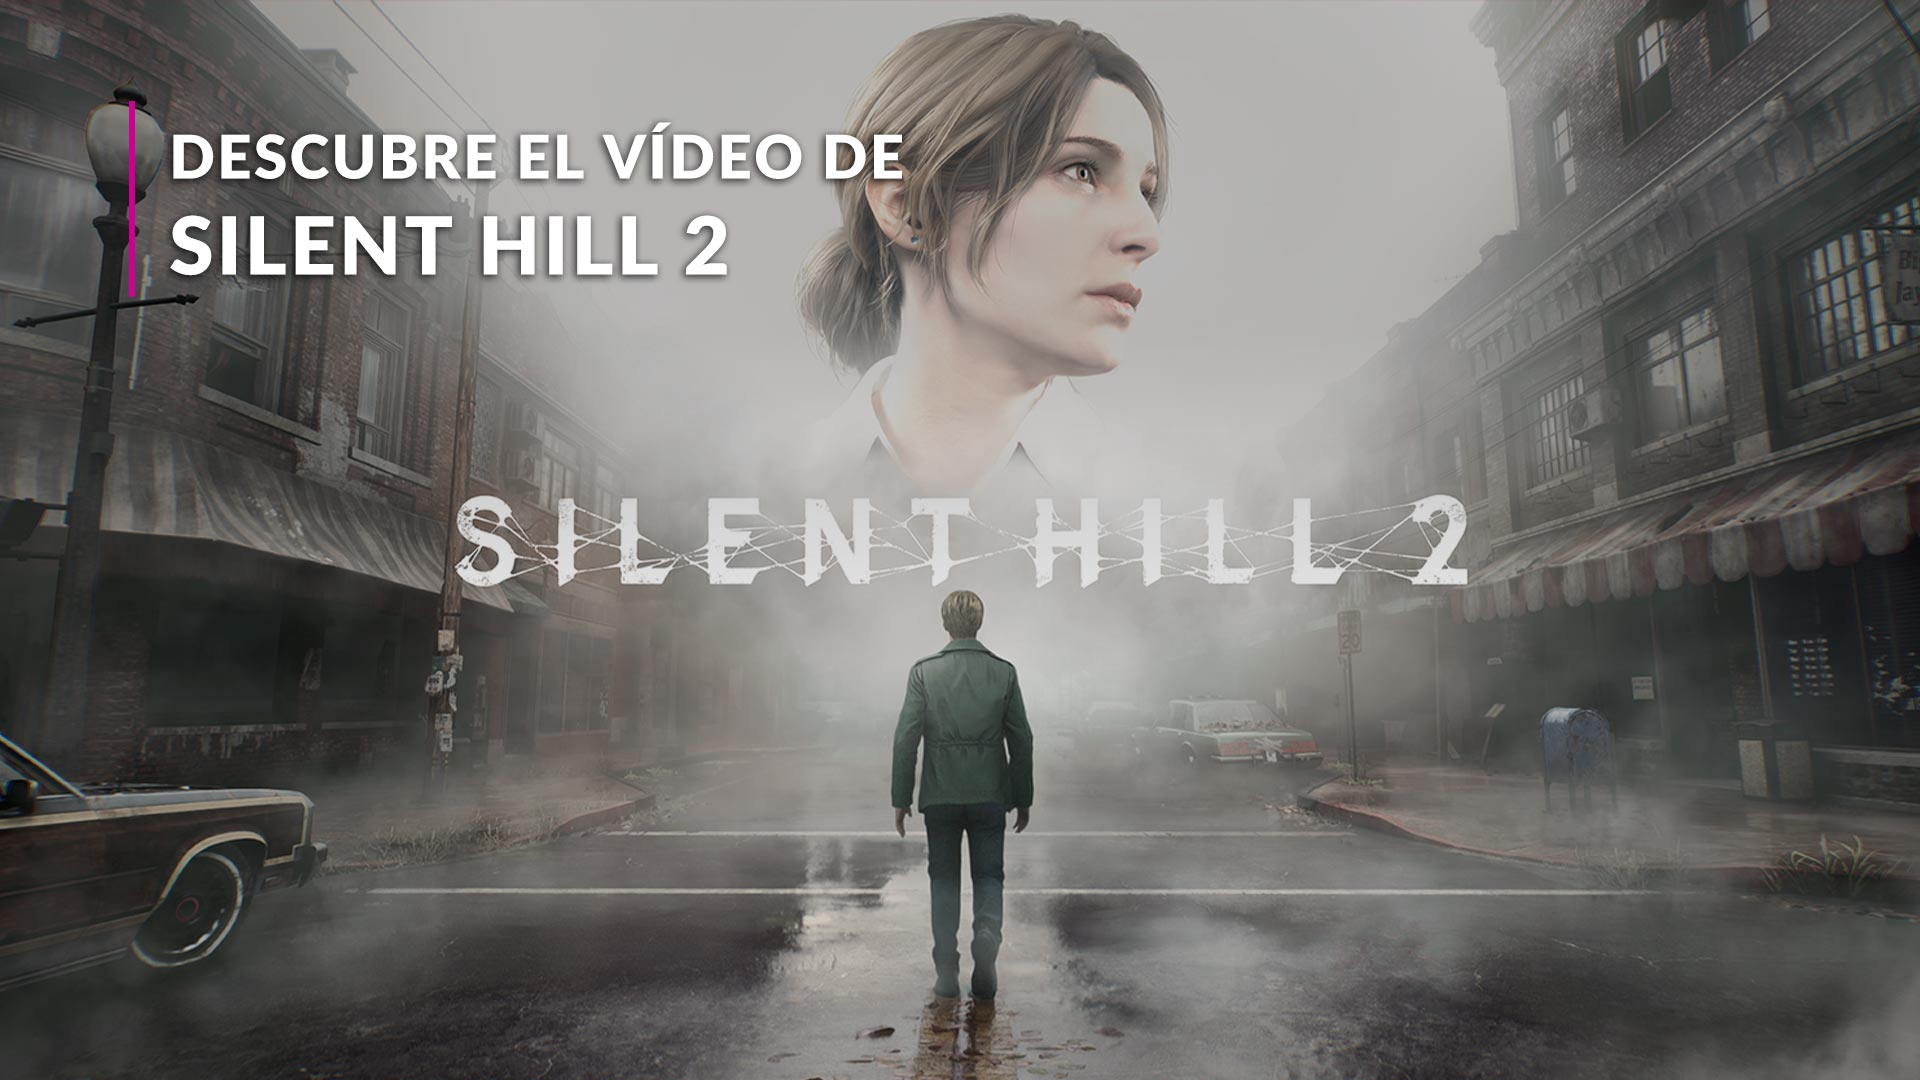 SILENT HILL 2 PS5 – Gameplanet